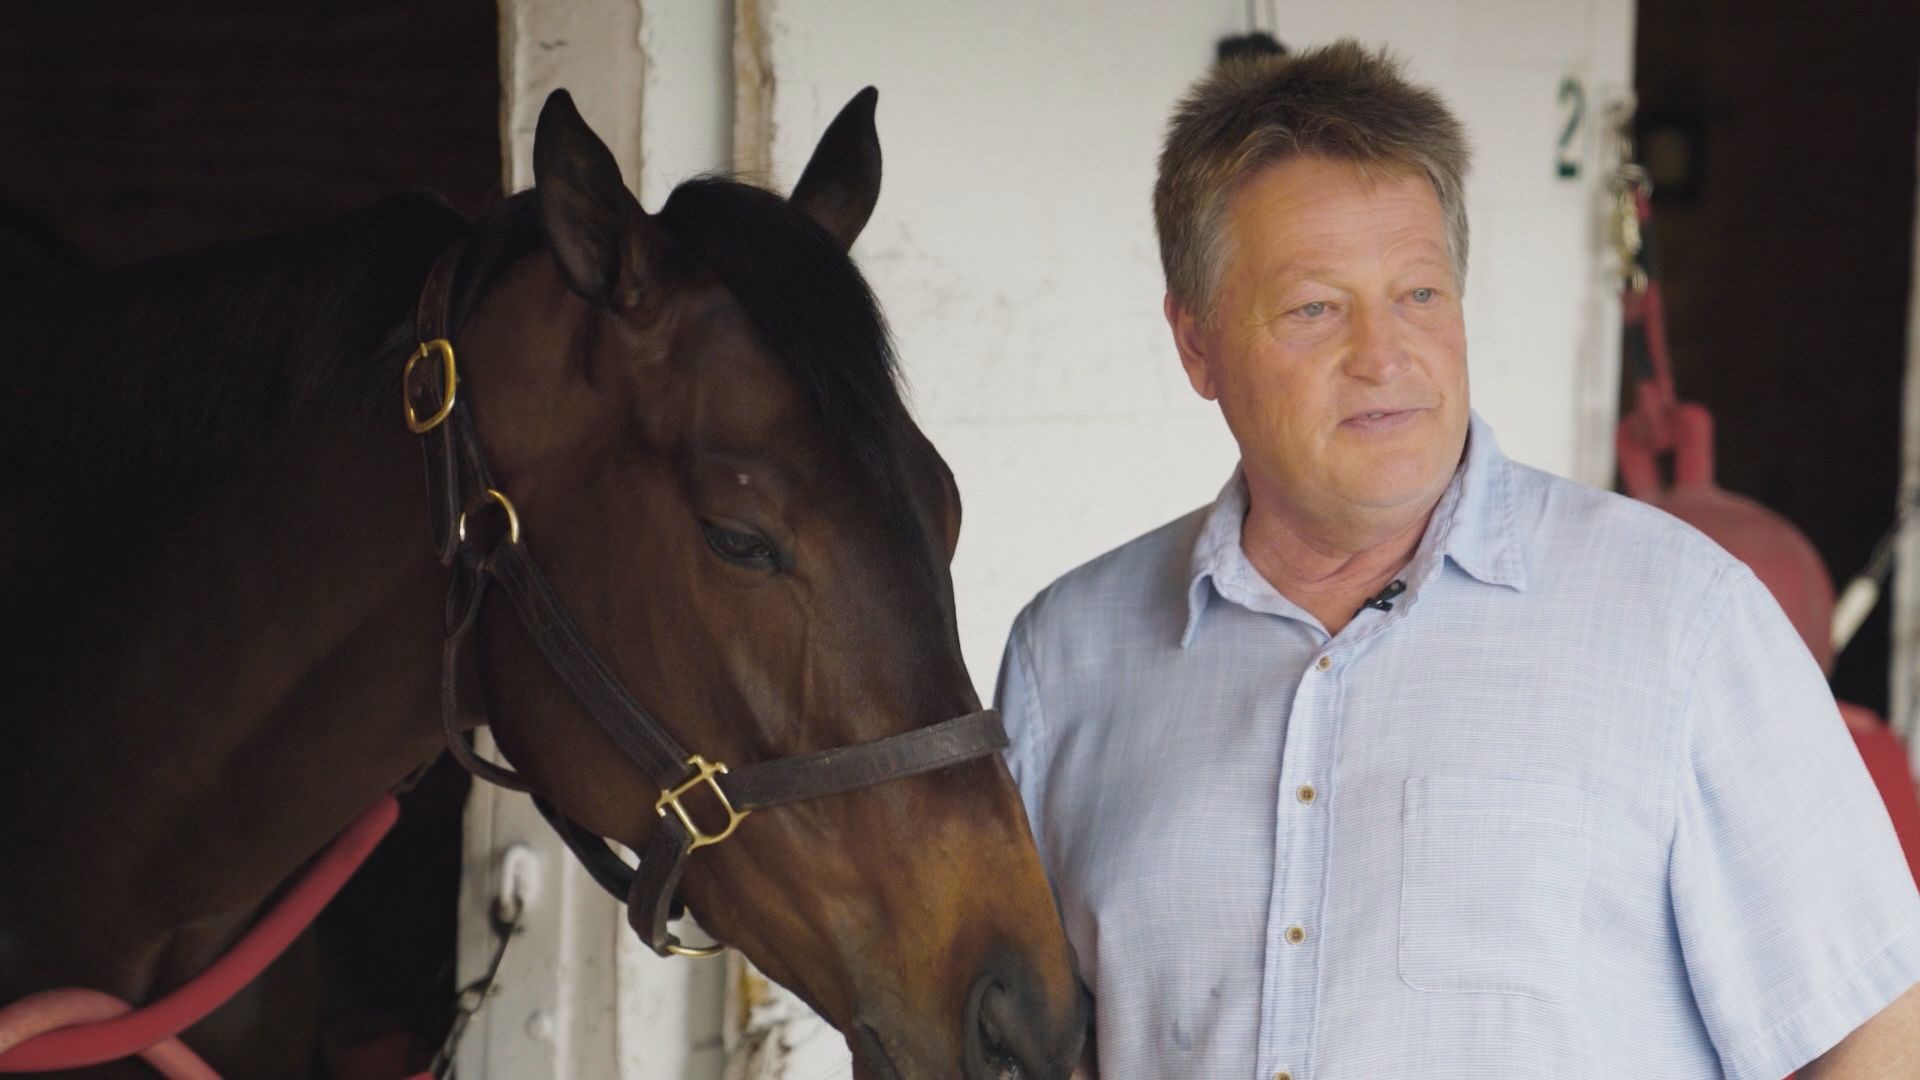 In 2020, Greg Foley surpassed the 1,400 win mark, with more than 400 of those wins at his home track Churchill Downs.